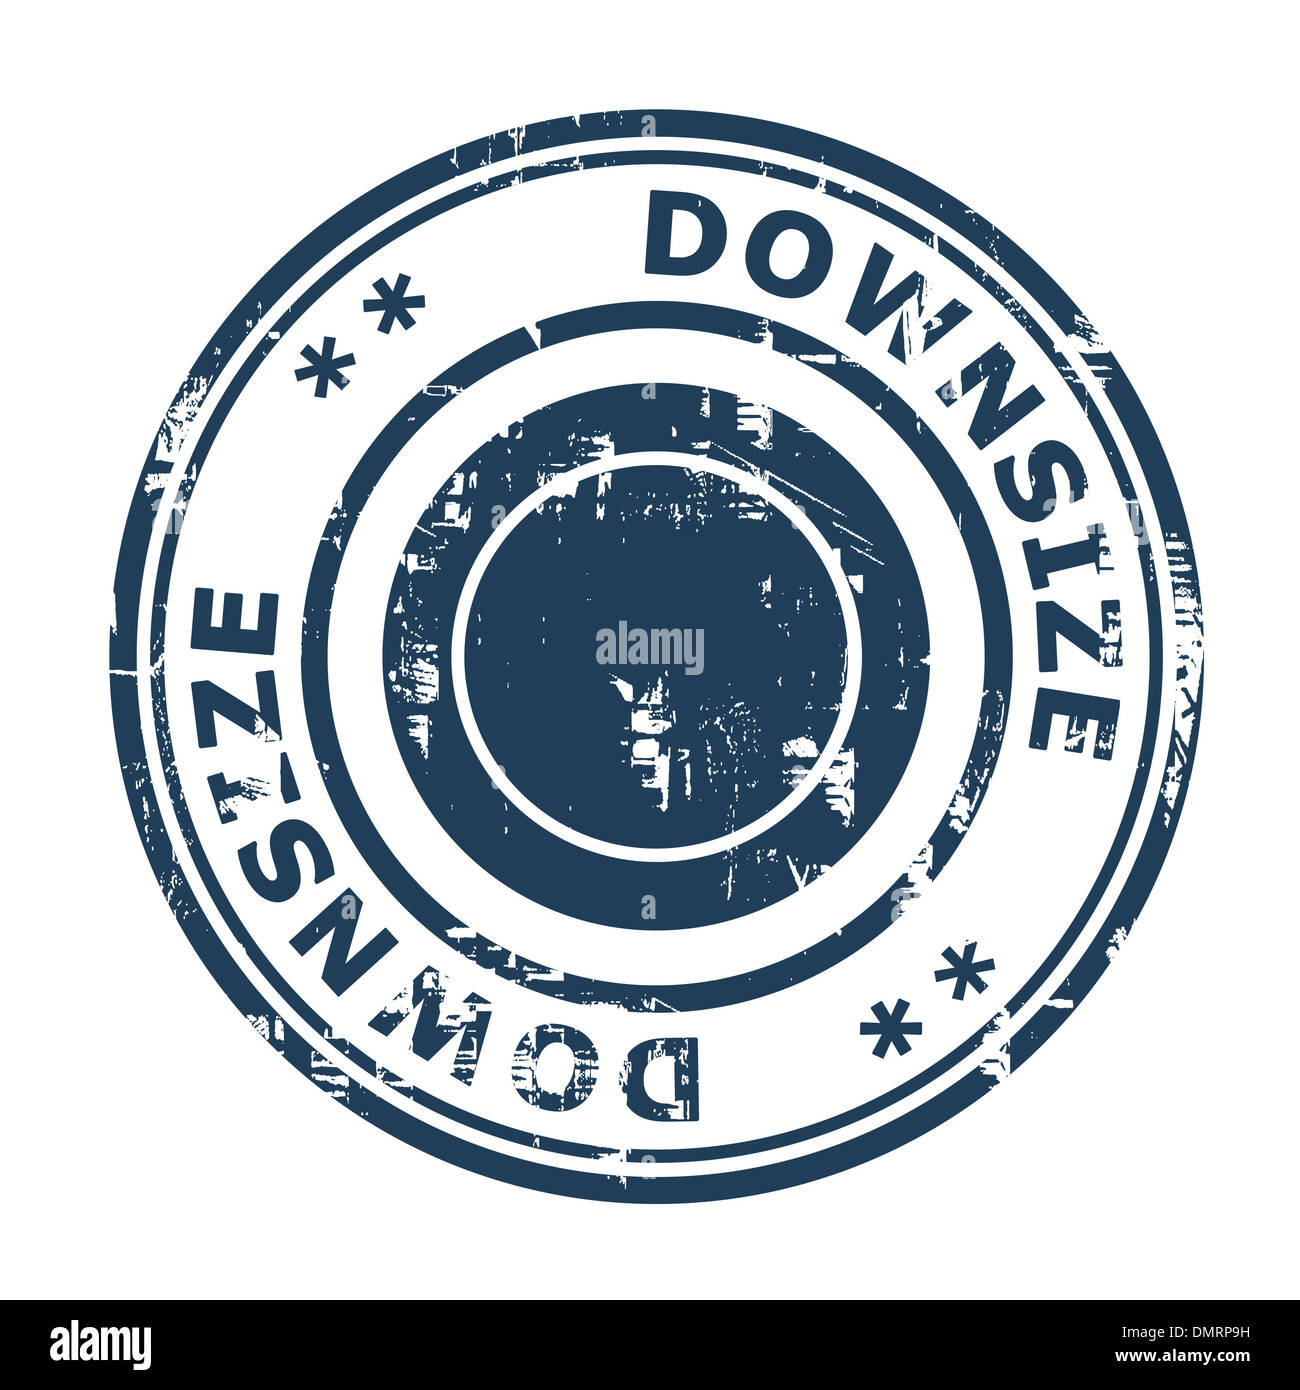 Downsize concept stamp isolated on a white background. Stock Photo